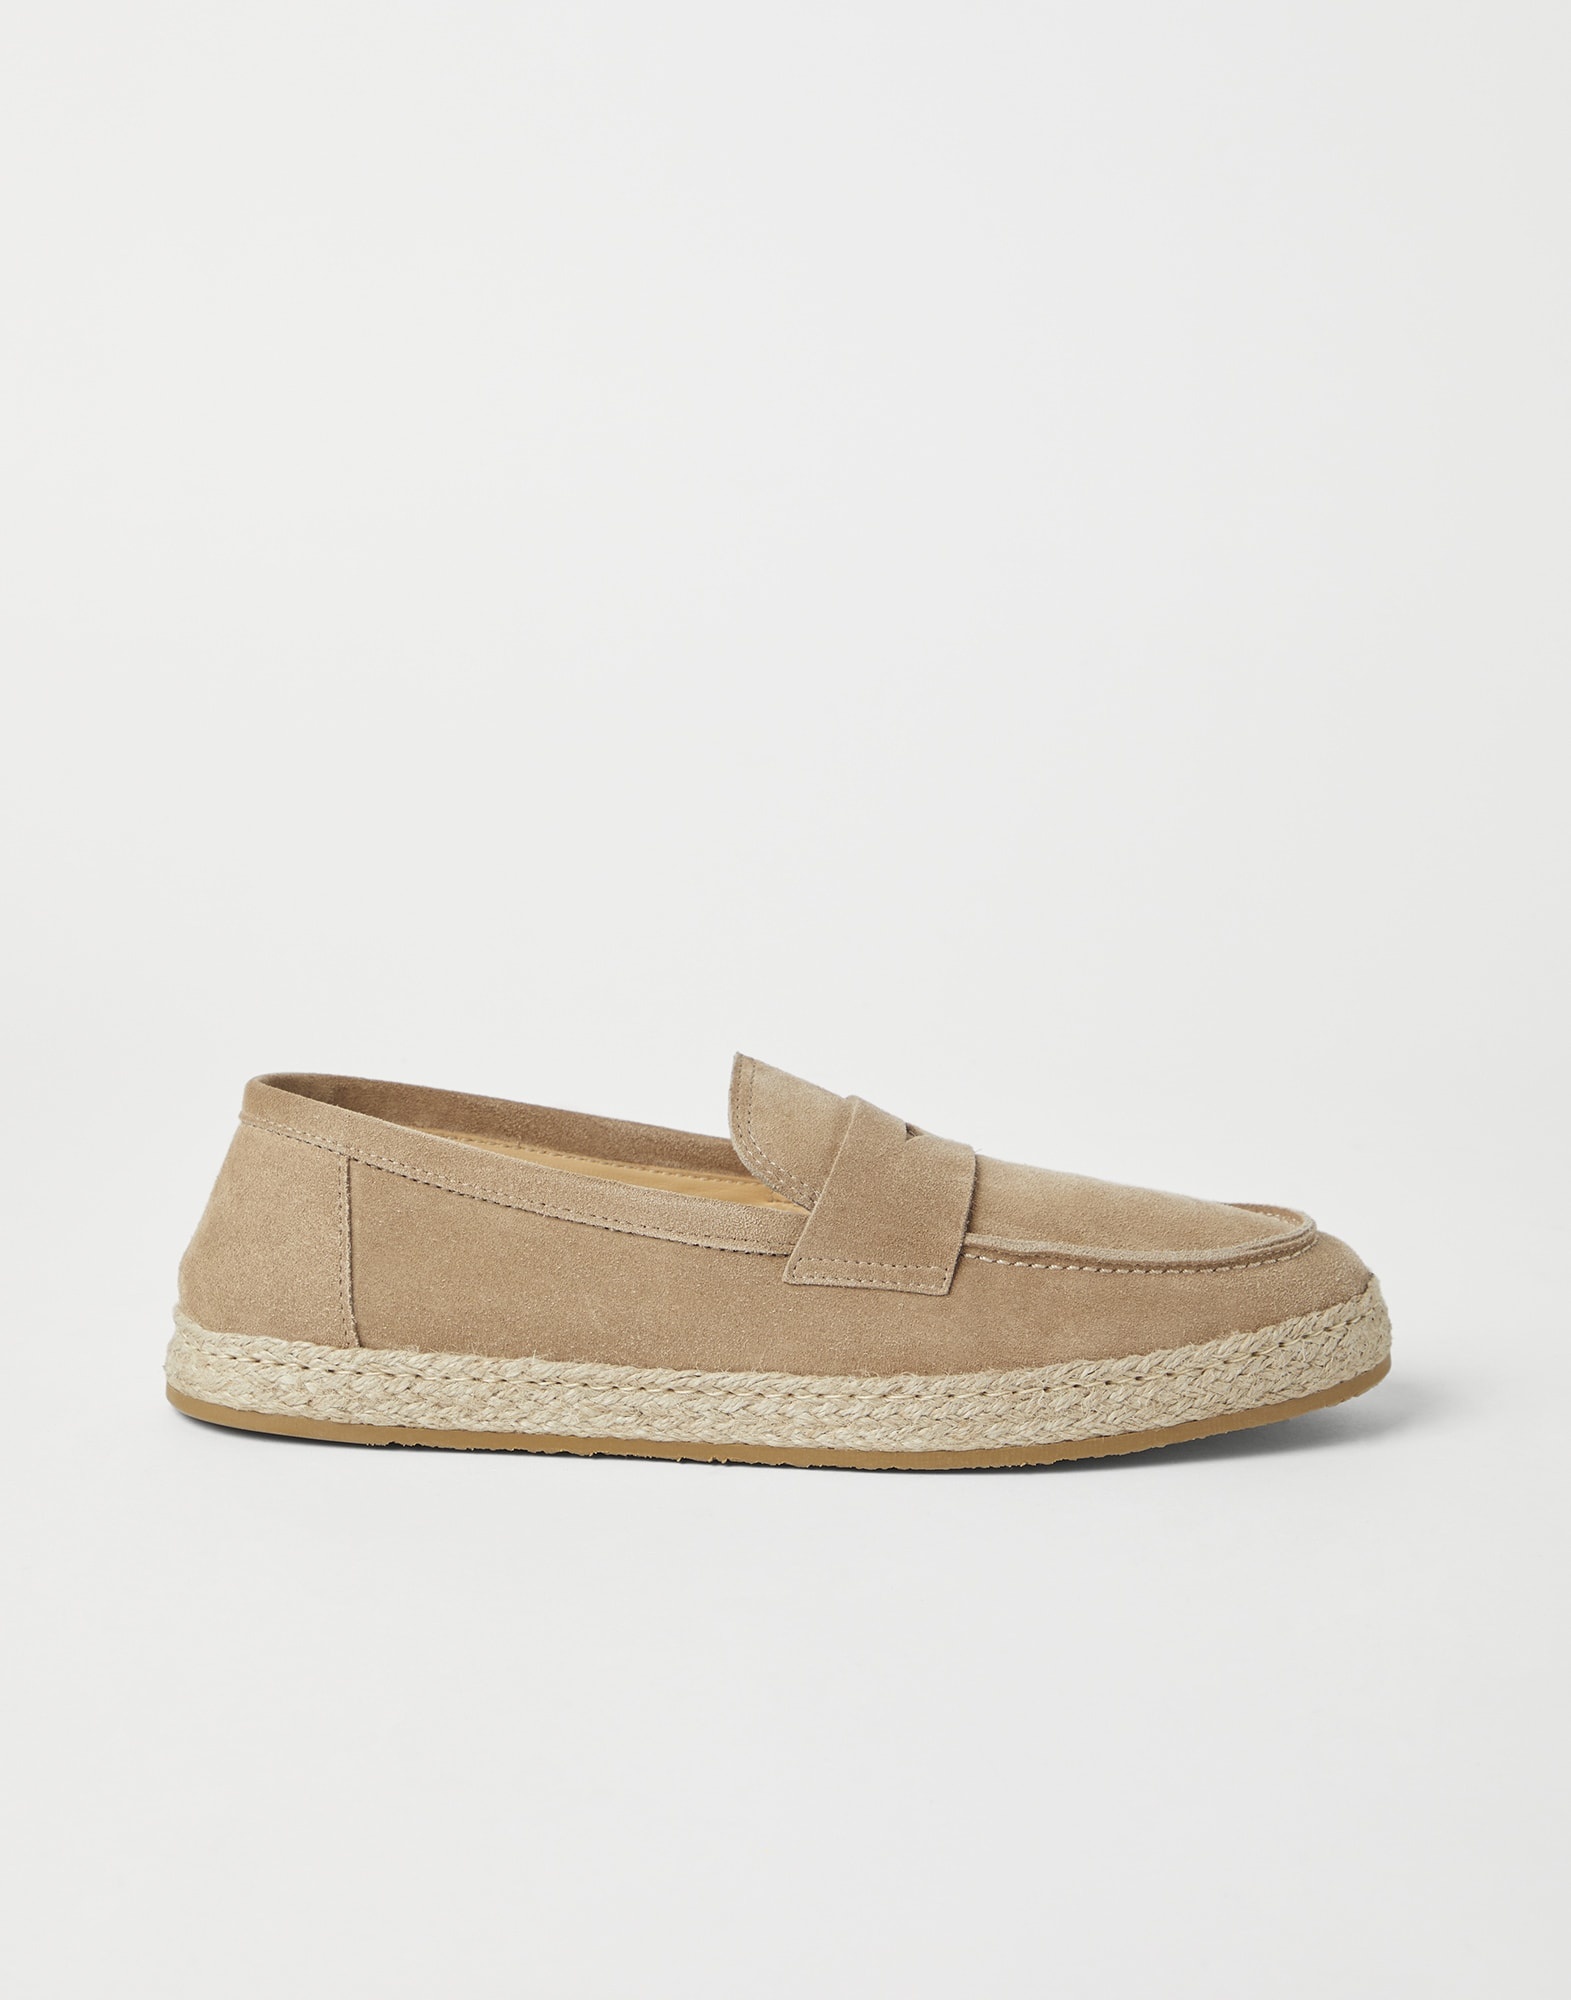 Suede loafer sneakers with rope insert - 1